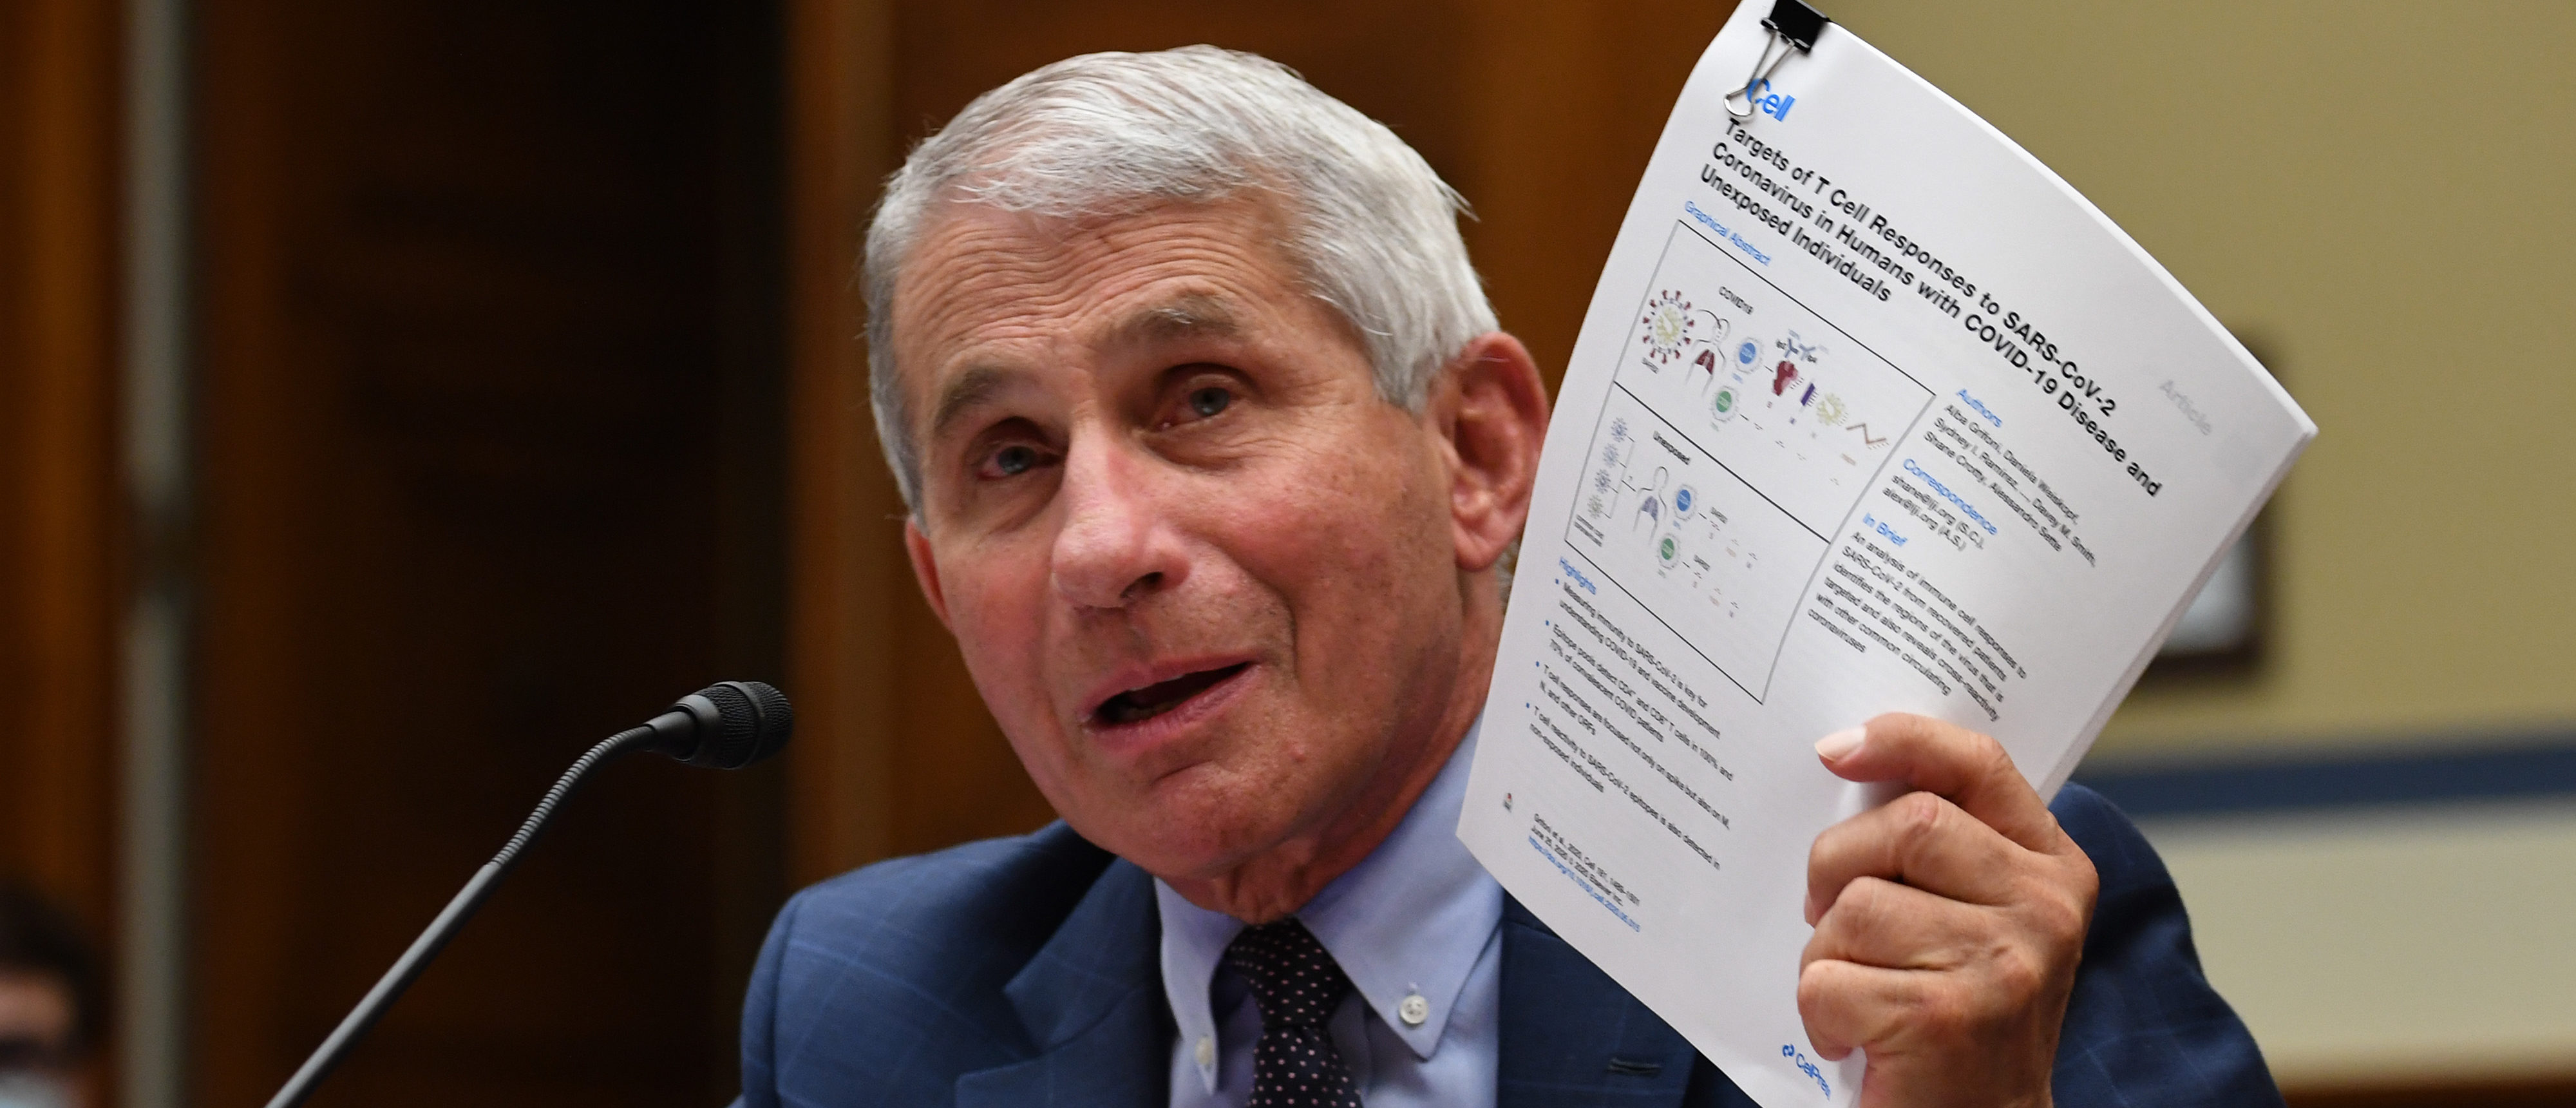 WASHINGTON, DC - JULY 31: Dr. Anthony Fauci, director of the National Institute for Allergy and Infectious Diseases, testifies before a House Subcommittee on the Coronavirus Crisis hearing on July 31, 2020 in Washington, DC. Trump administration officials are set to defend the federal government's response to the coronavirus crisis at the hearing hosted by a House panel calling for a national plan to contain the virus. (Kevin Dietsch-Pool/Getty Images)